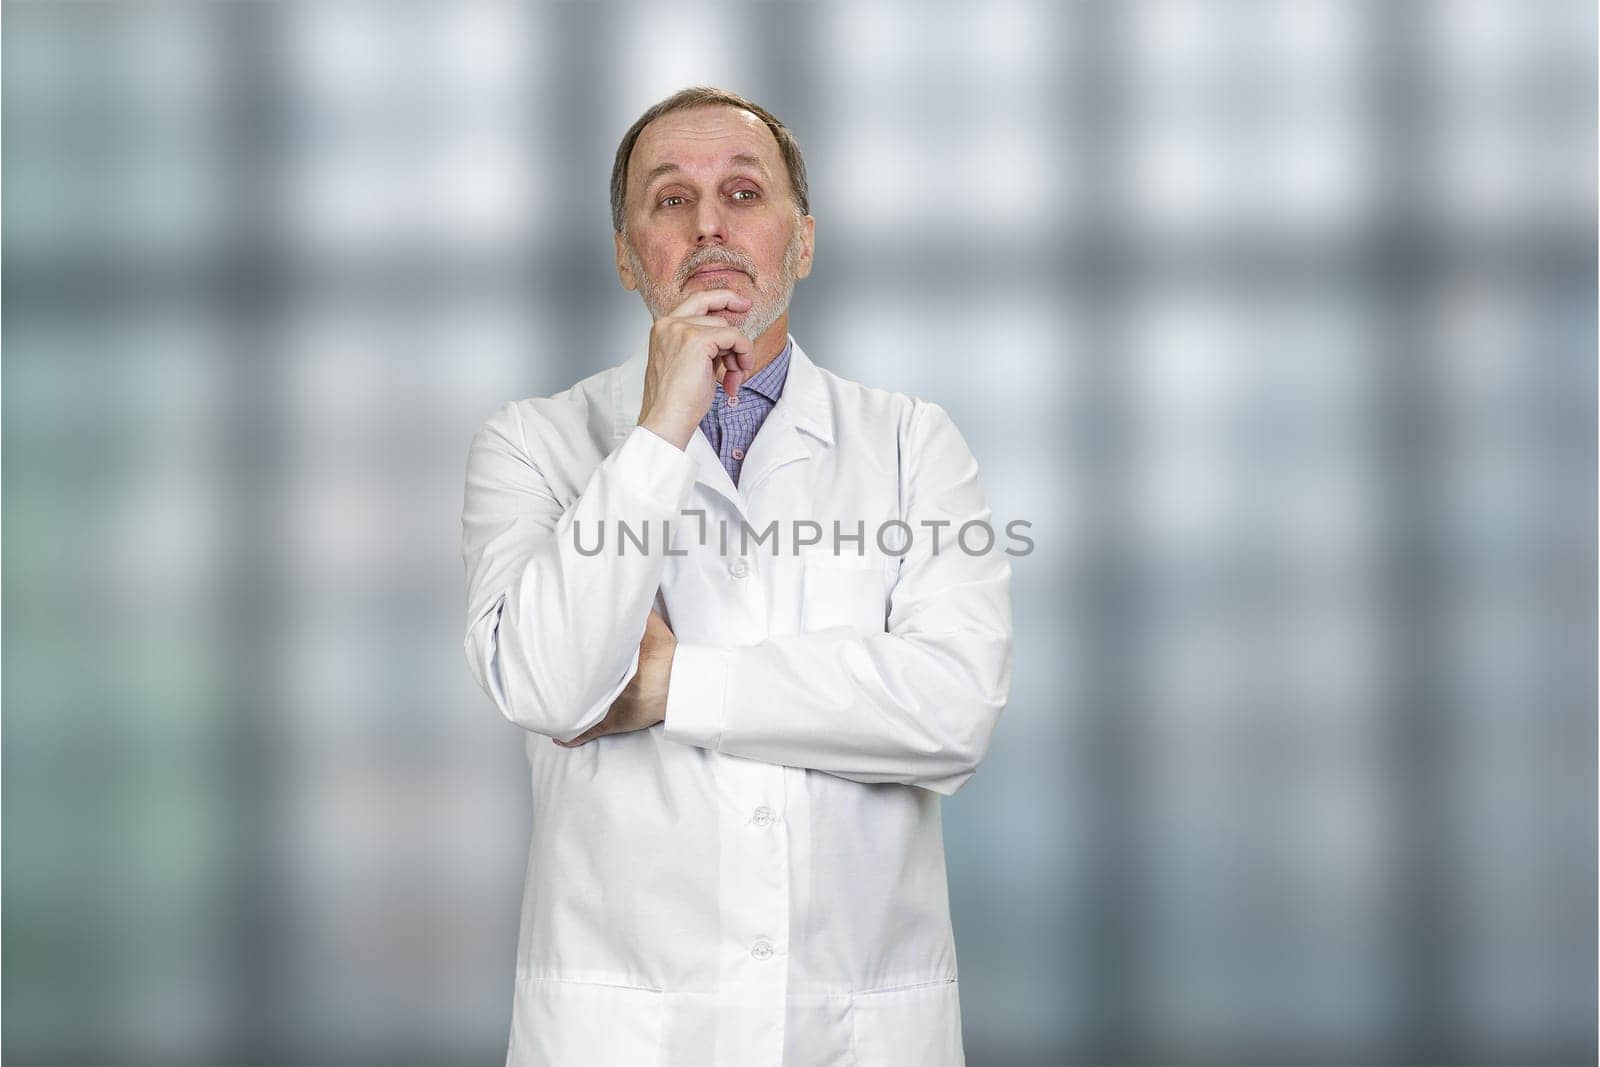 Thoughtful pensive senior male doctor looking away. Blurred checkered window background.